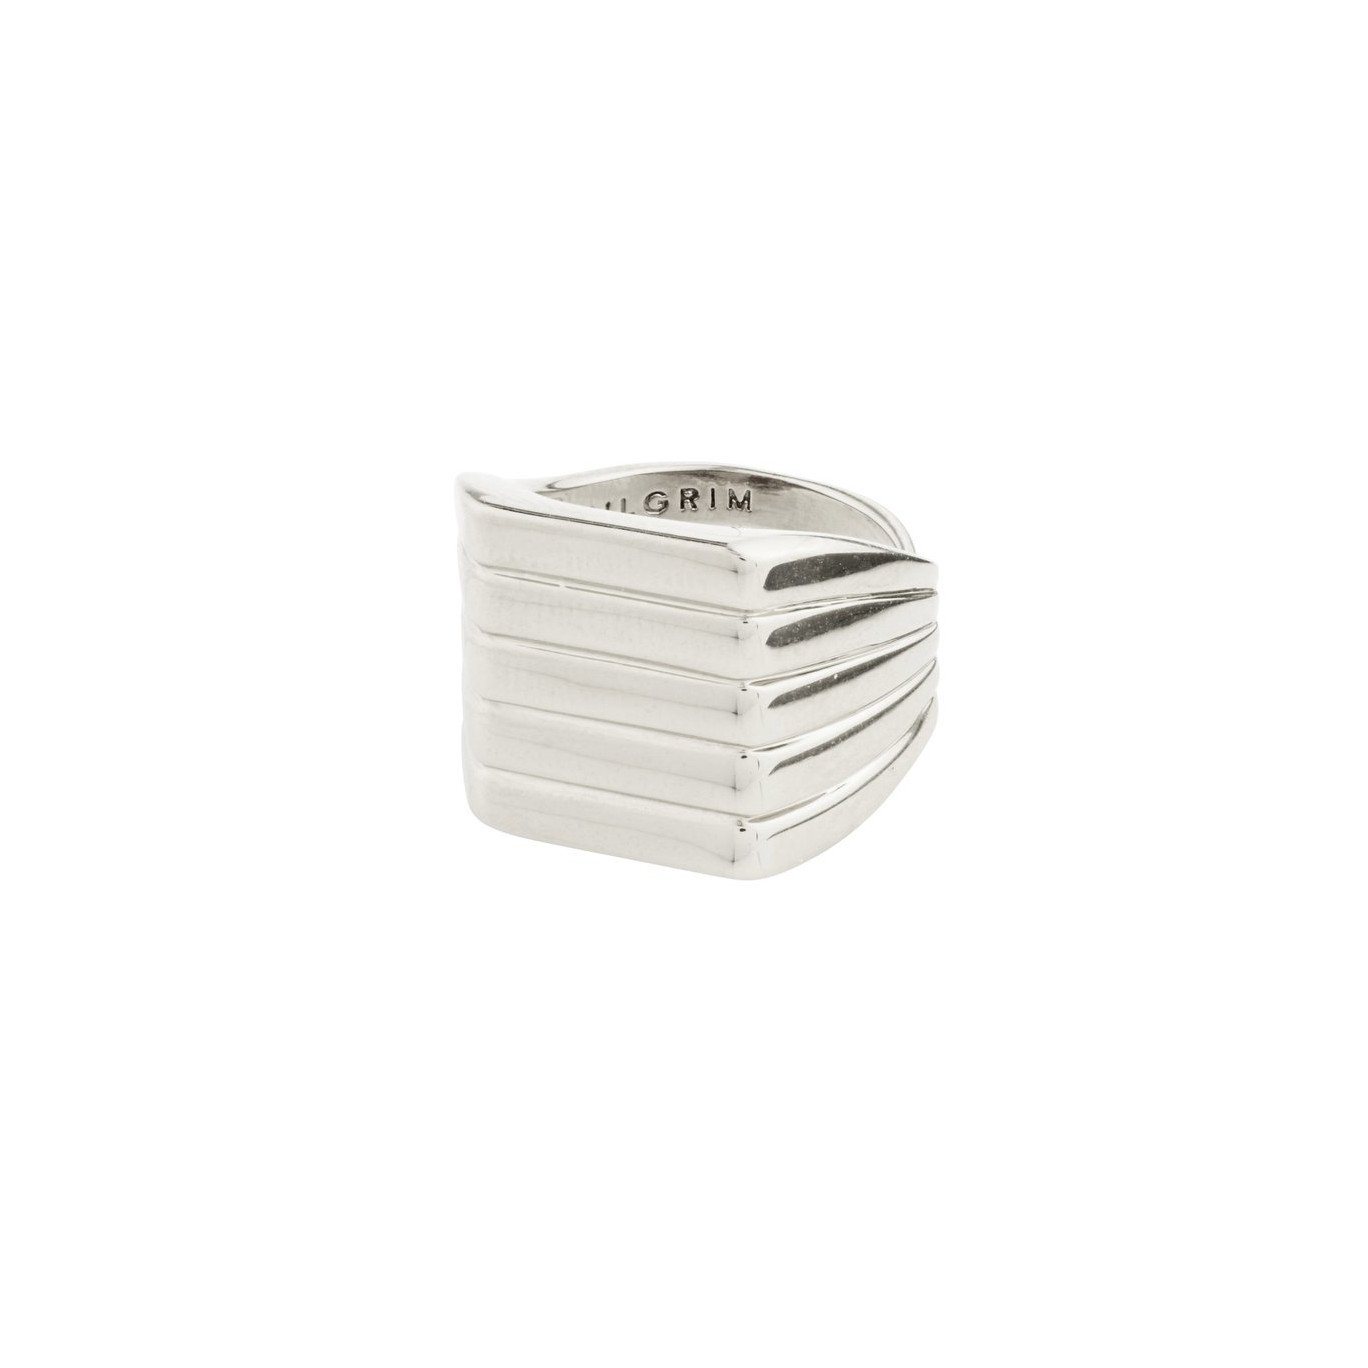 Gotstyle Fashion - Pilgrim Jewellery Layered Structure Silver Plated Ring